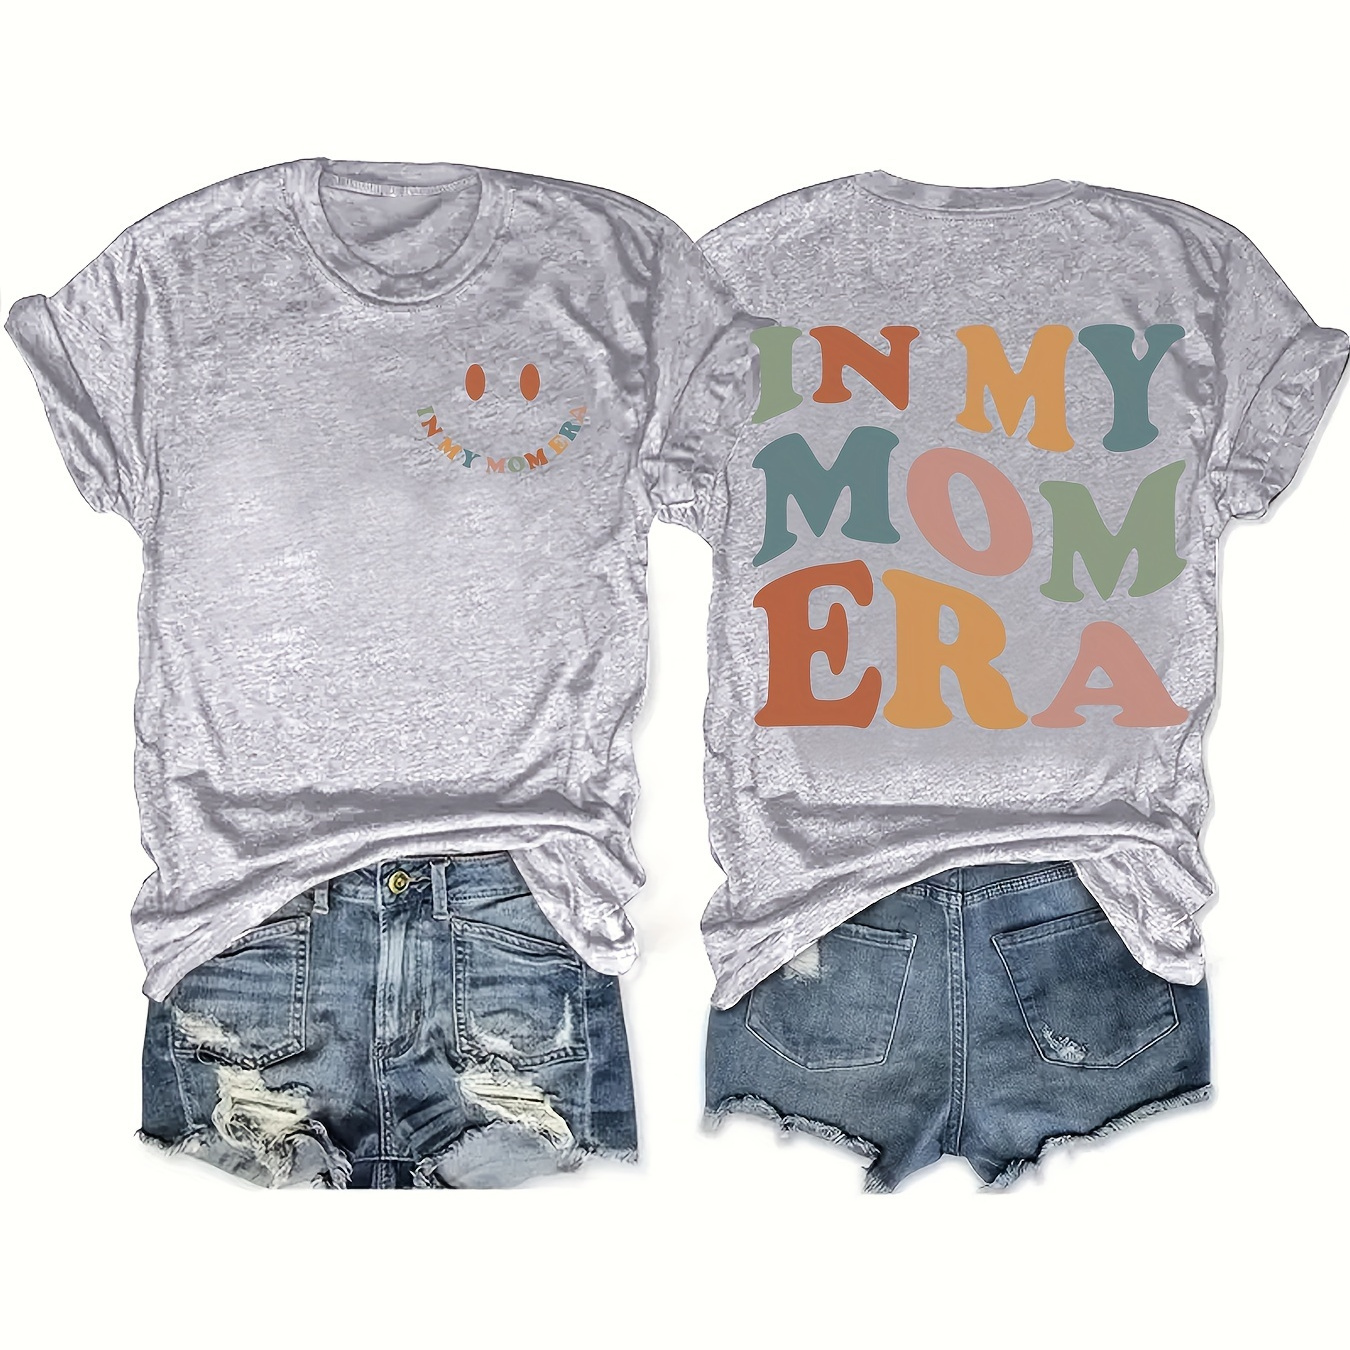 

Plus Size In My Mom Era Print T-shirt, Casual Crew Neck Short Sleeve T-shirt, Women's Plus Size clothing